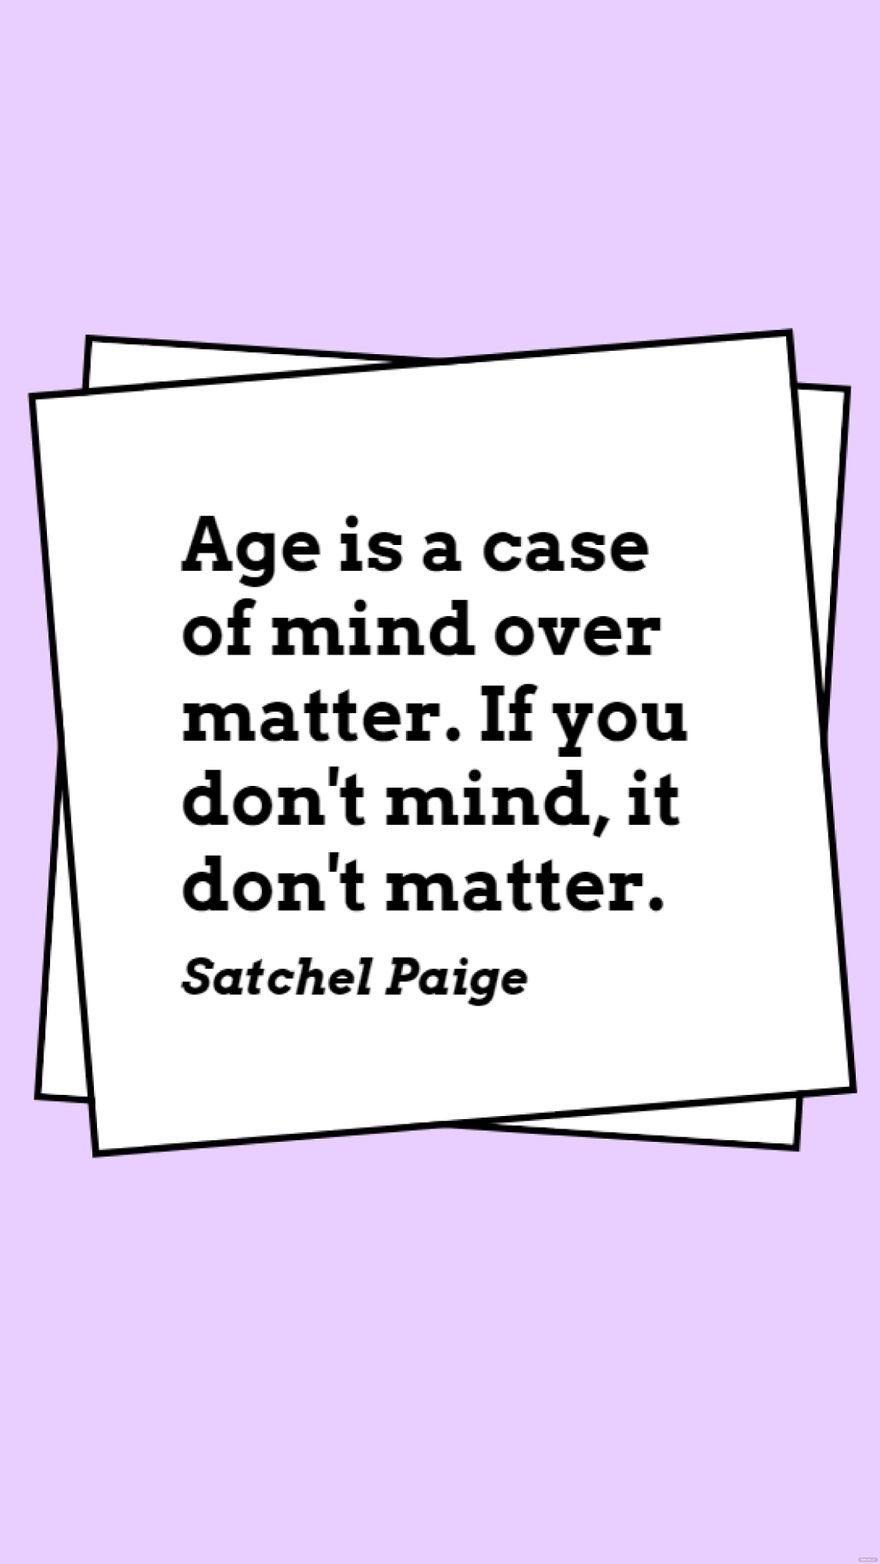 Satchel Paige - Age is a case of mind over matter. If you don't mind, it don't matter. in JPG